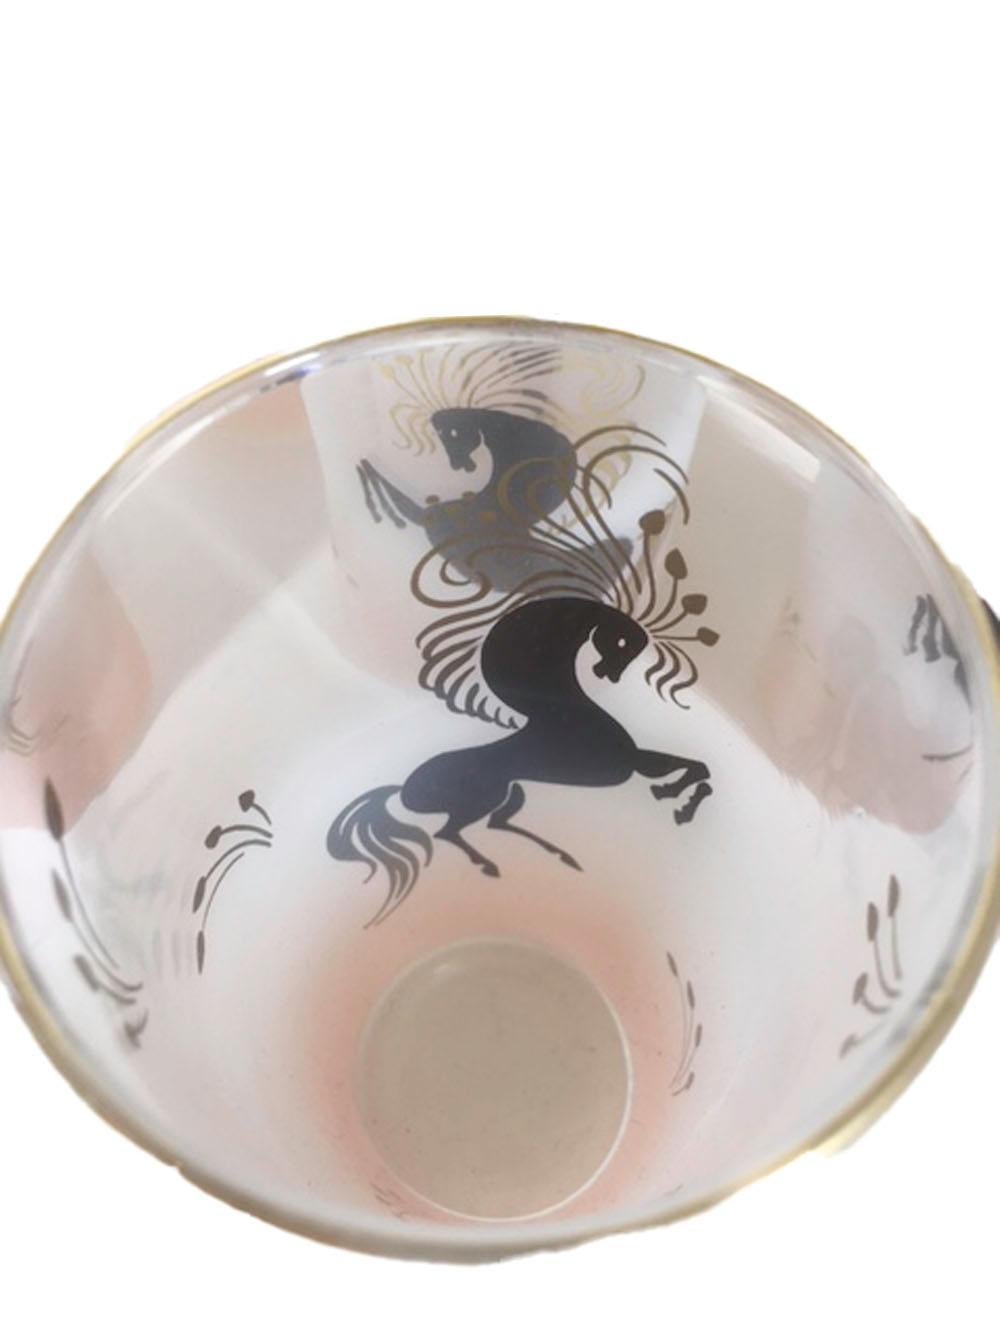 American Vintage Libbey Highball Glasses, Black Stylized Horses on Pink Frosted Ground